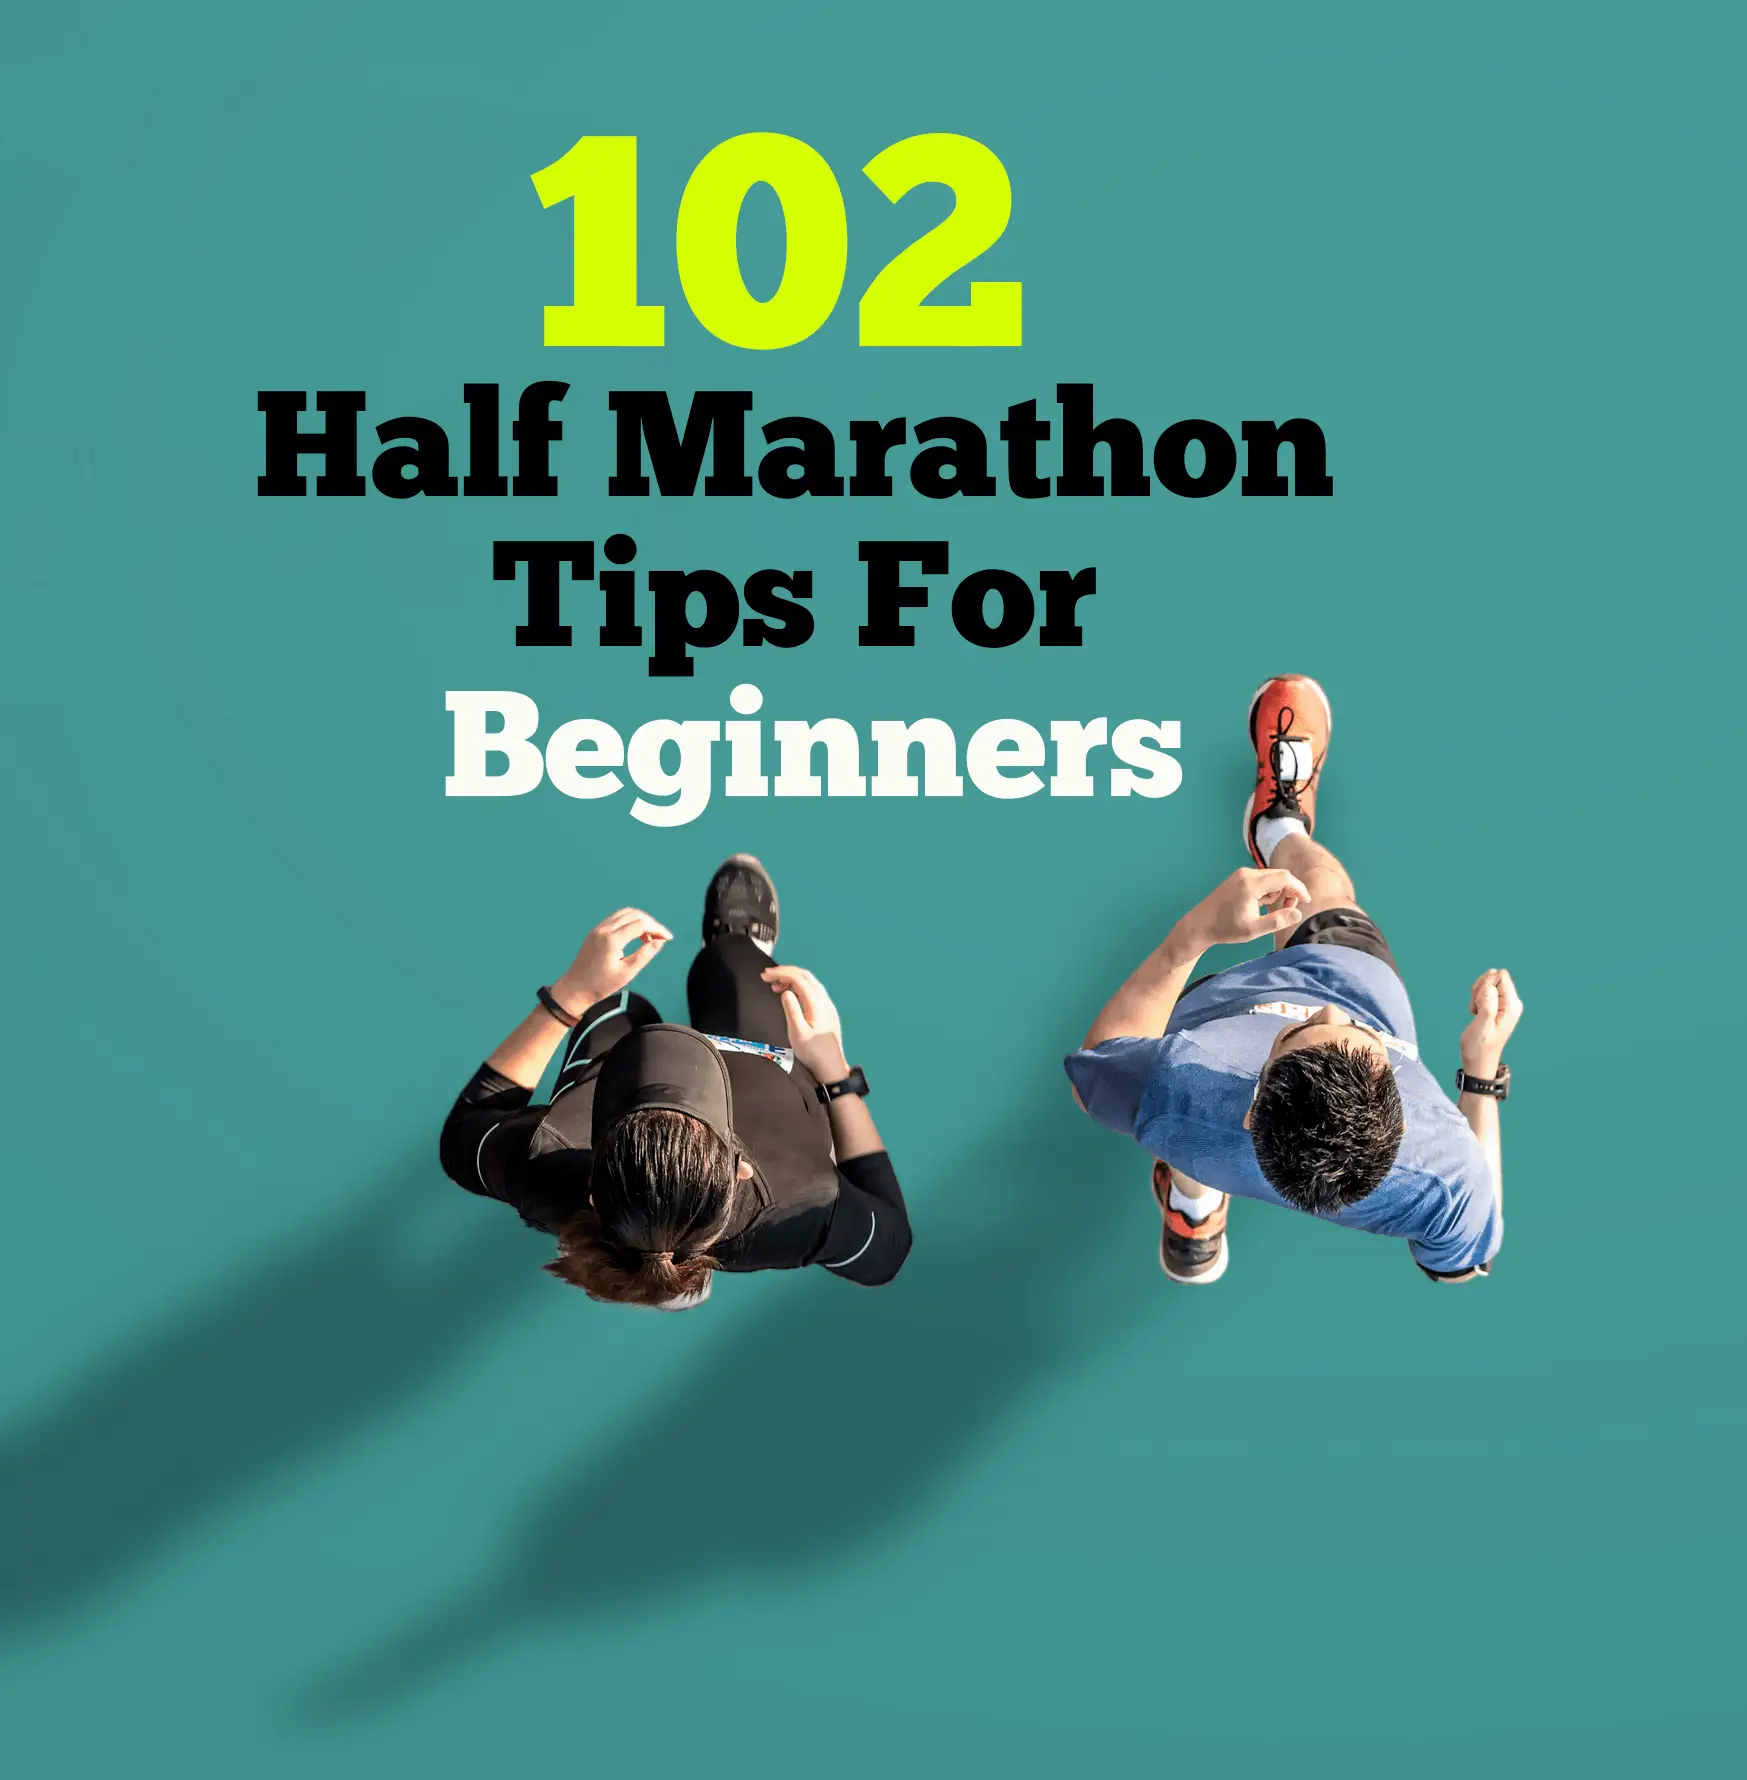 102 Half Marathon Tips For Beginners - Make your first race your best!